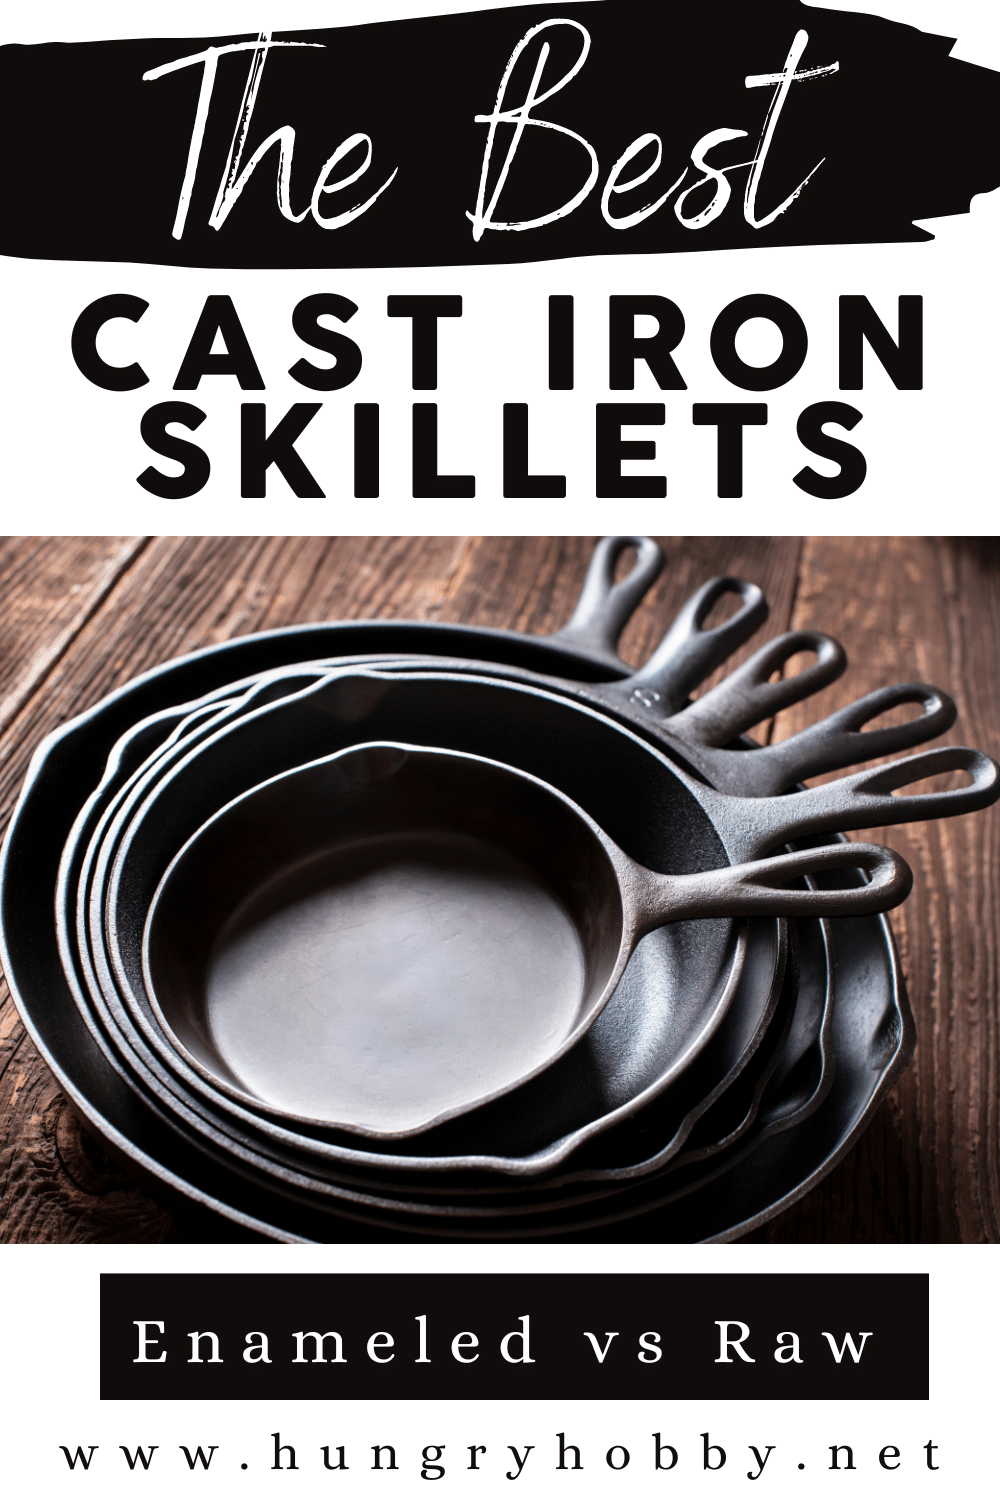 https://hungryhobby.net/wp-content/uploads/2023/03/Cast-Iron-Skillet-PIN.png